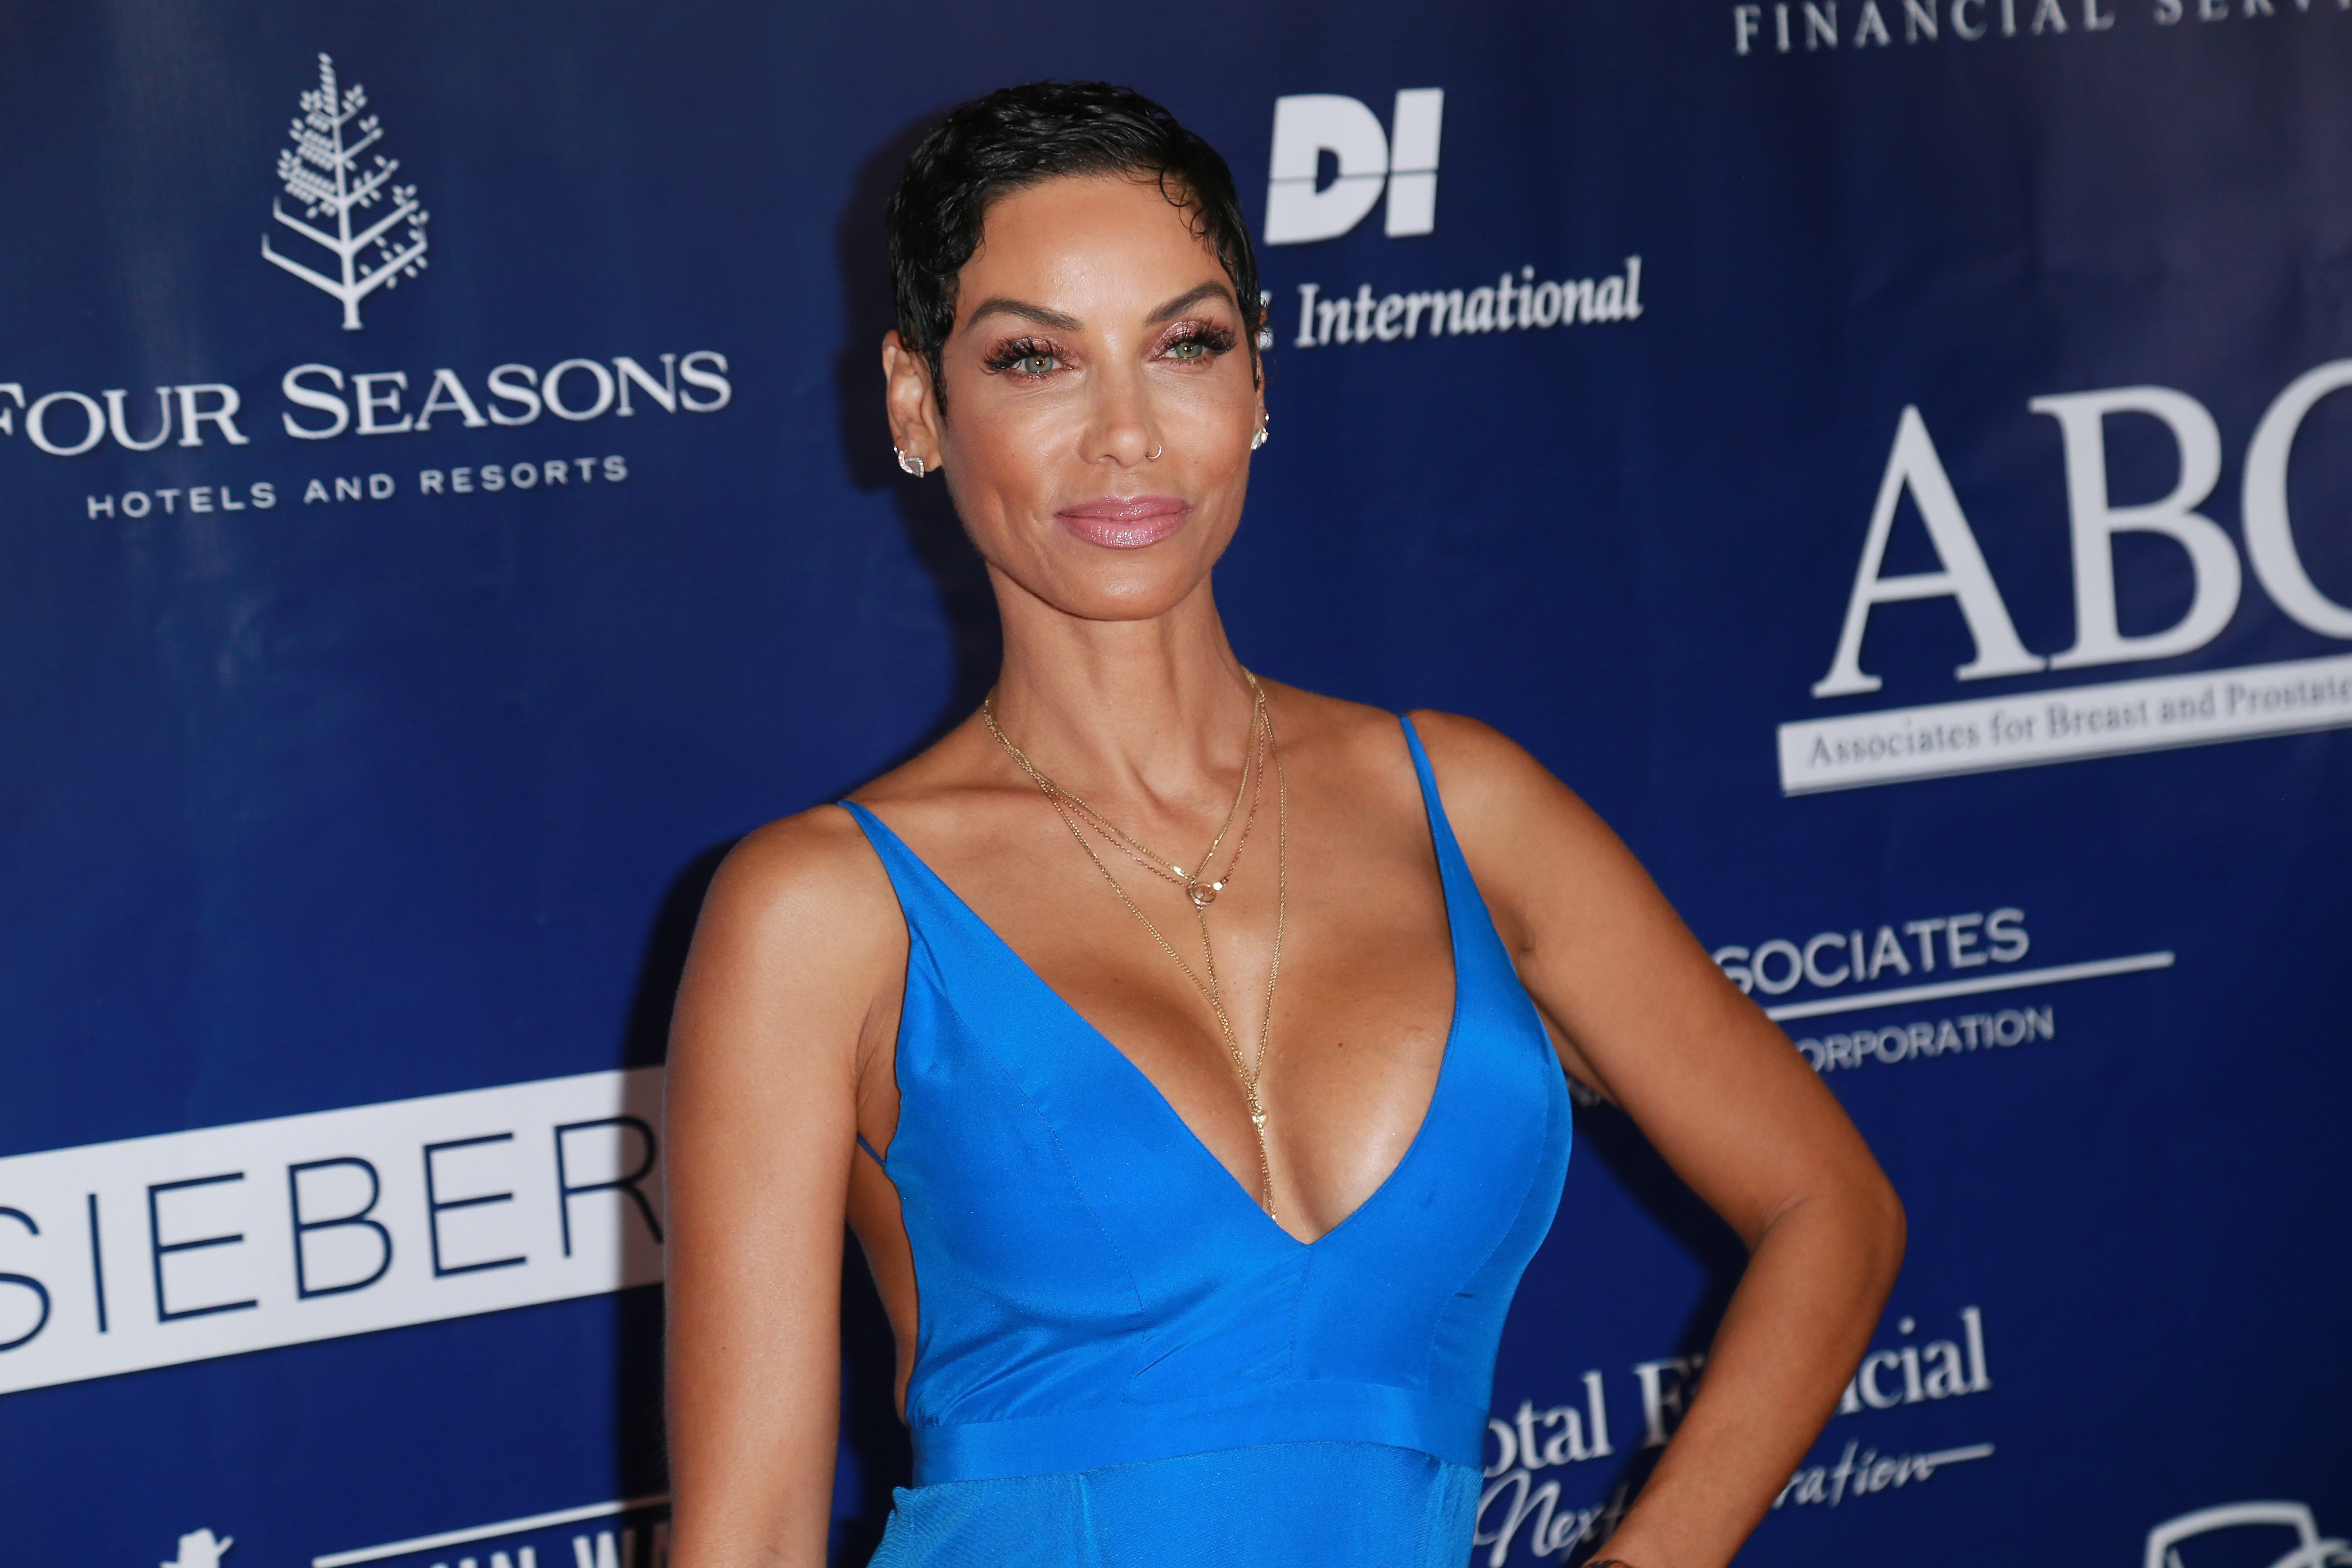 Nicole Mitchell Murphy attends the 28th Annual Talk Of The Town Gala at The Beverly Hilton Hotel on November 18, 2017 | Photo: Getty Images